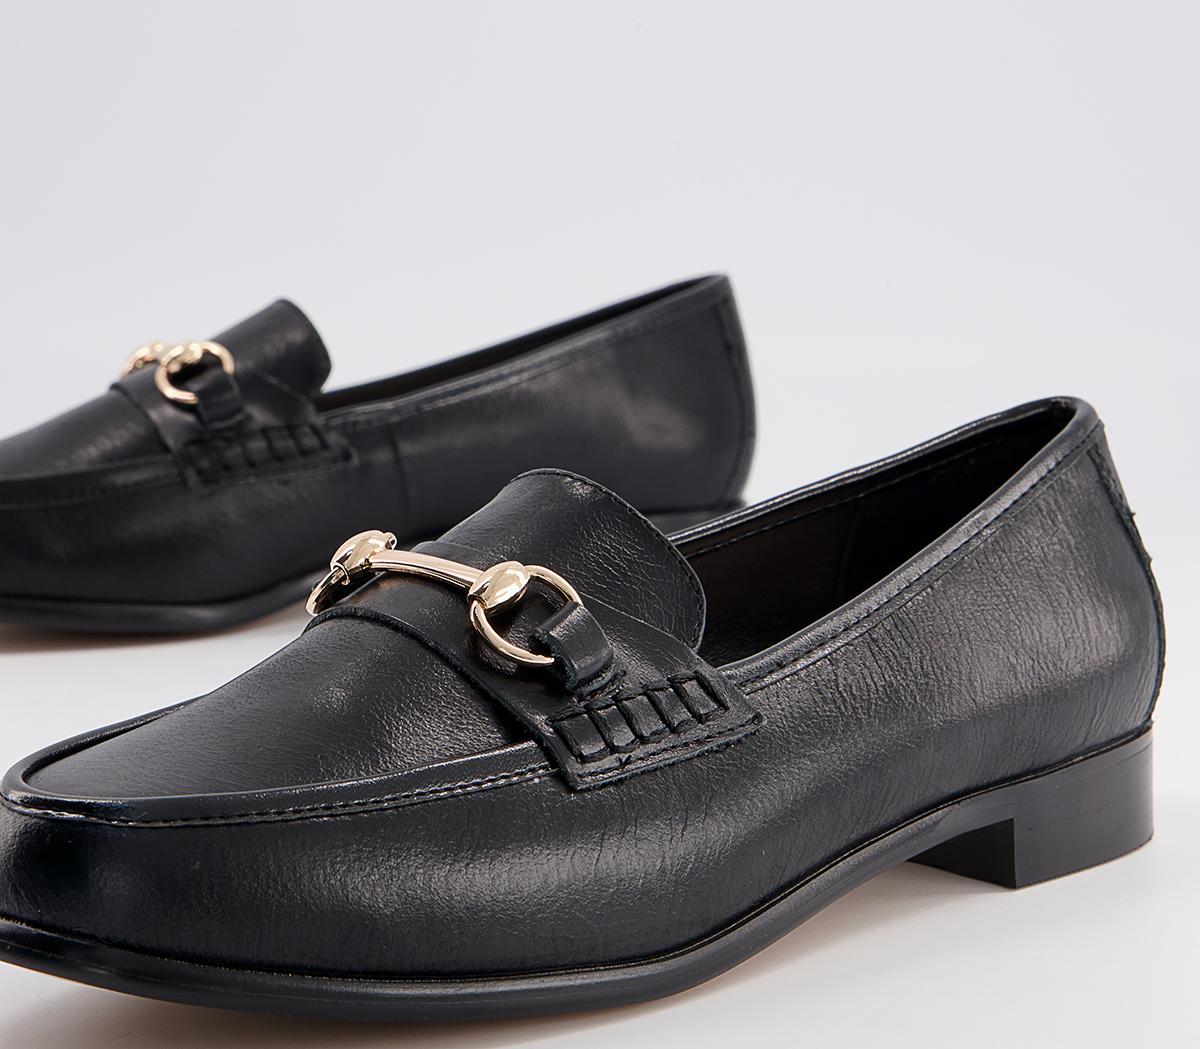 OFFICE Formally Snaffle Trim Loafers Black Leather - Flat Shoes for Women